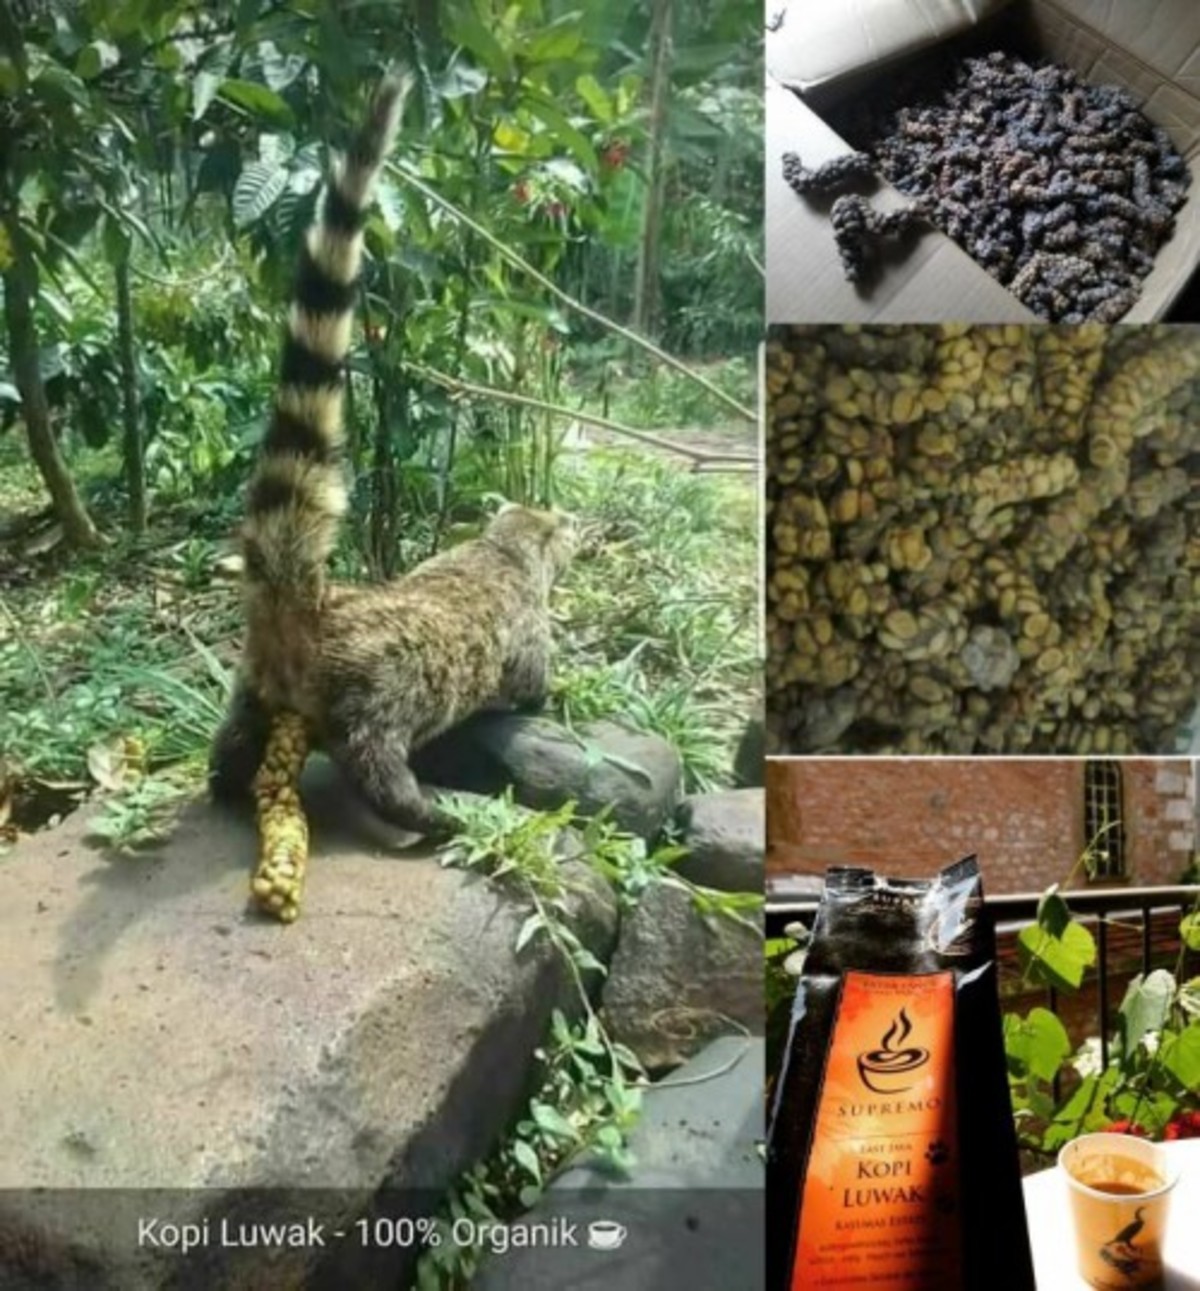 How the most expensive coffee is made. . Kopi Luwak - 100% Organic. This coffee tastes like